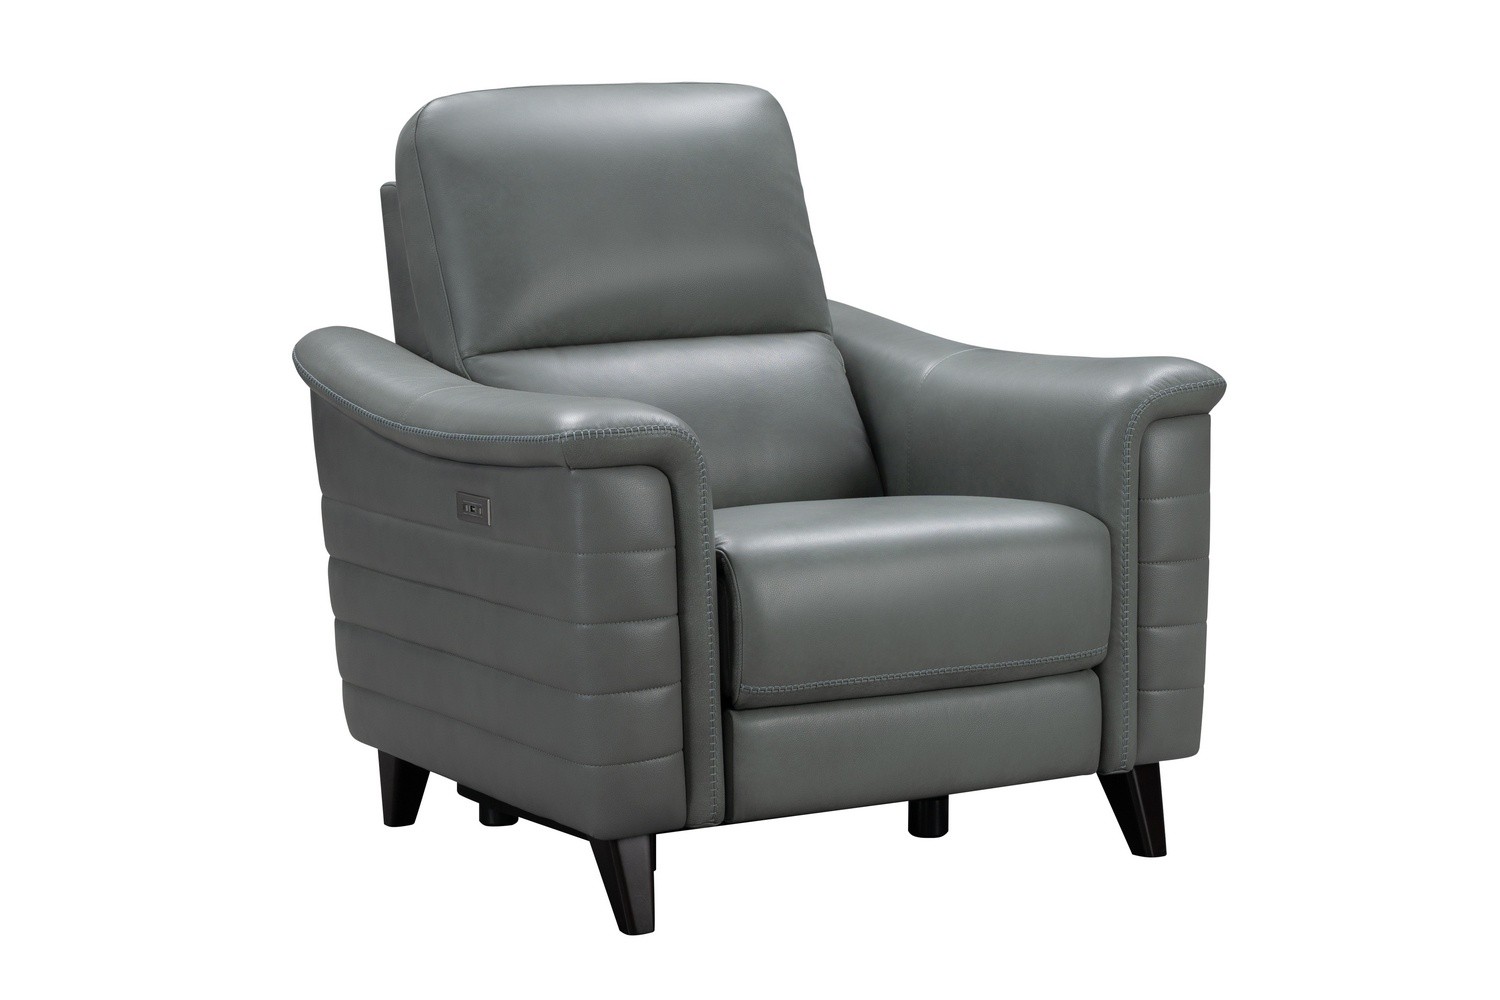 Barcalounger Malone Power Recliner Chair with Power Head Rest - Antonio Green Gray/Leather Match